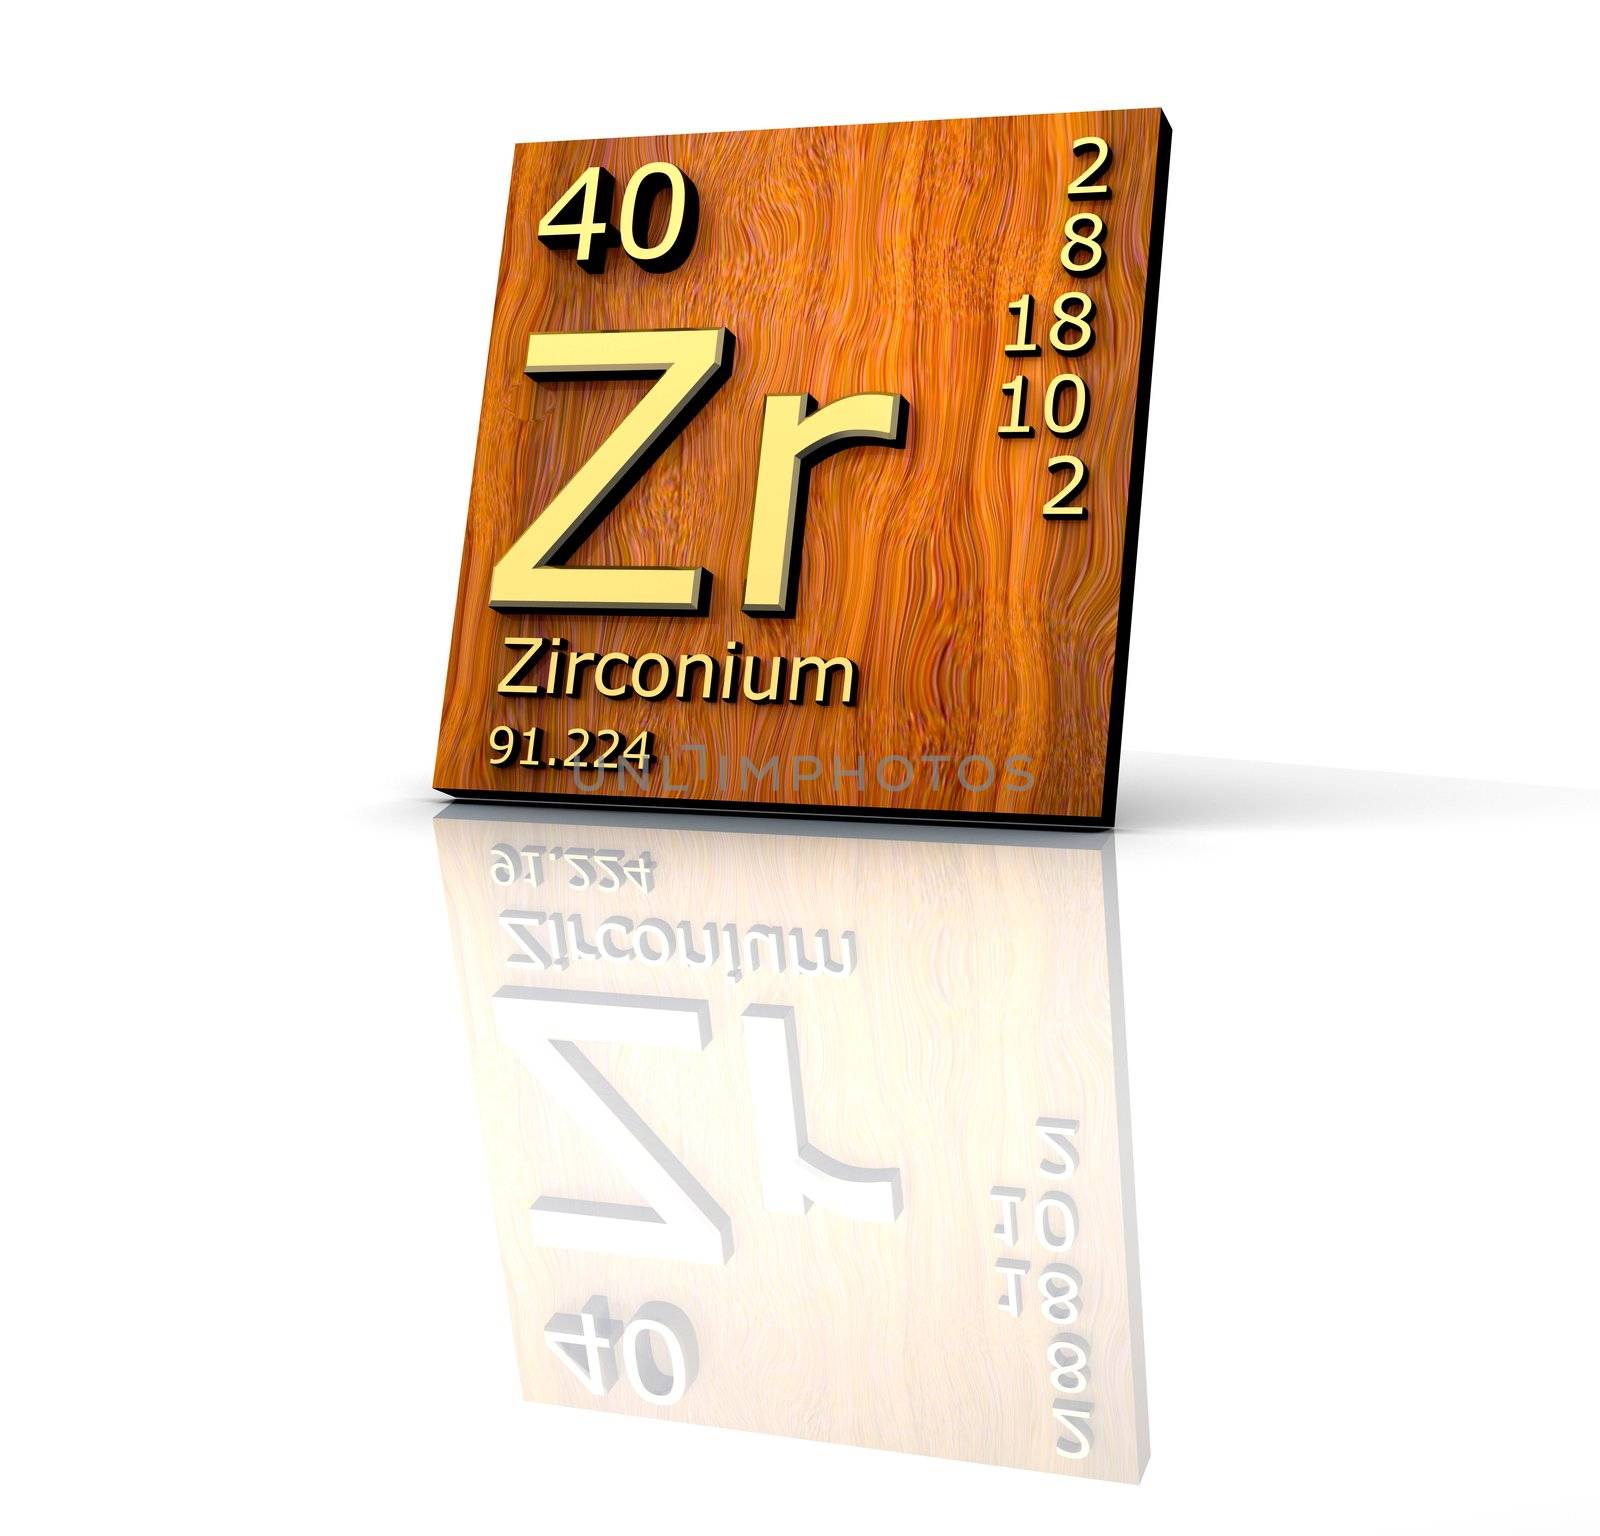 Zirconium form Periodic Table of Elements - wood board - 3d made